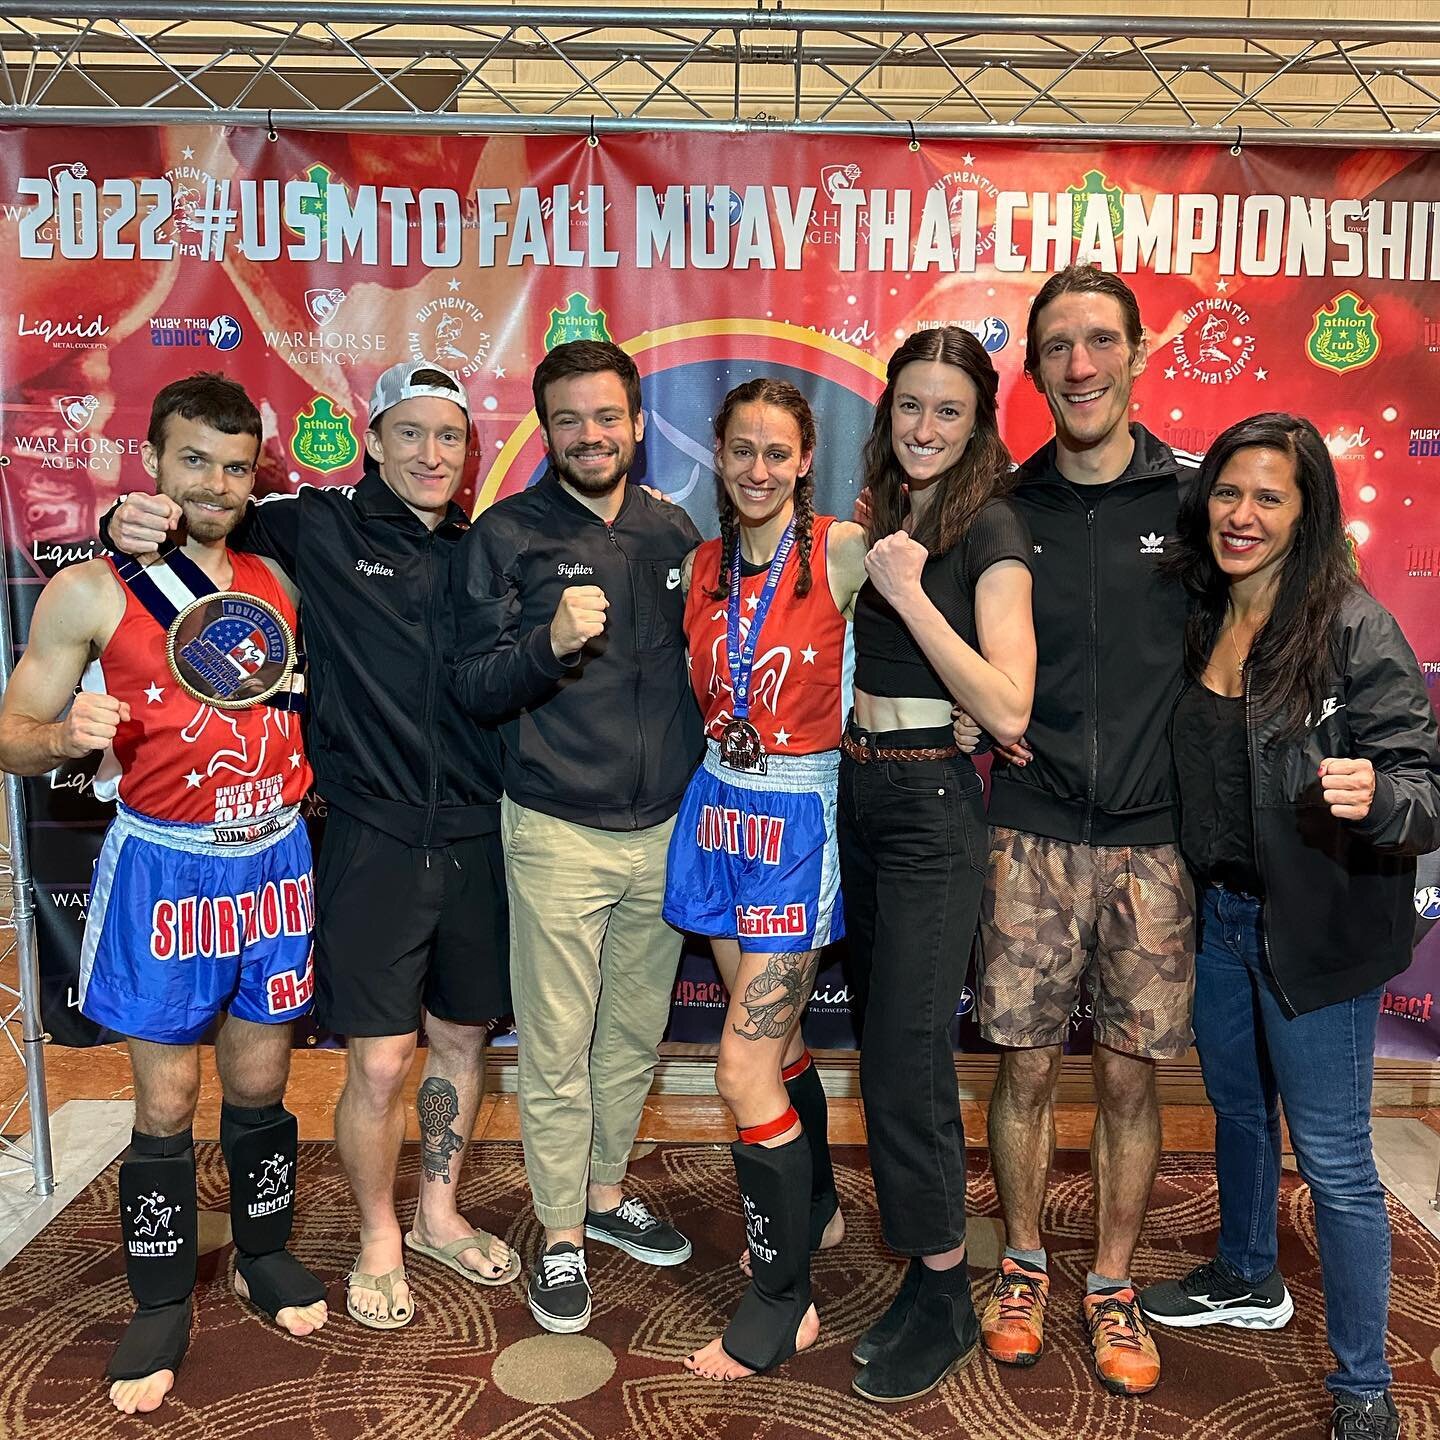 Congratulations to the entire fight team that competed this past weekend at the U.S. Open! Several amazing fights and victories with four fighters going into the championship and 2 bringing home the belt. Major congratulations to @__noodle.doodle and